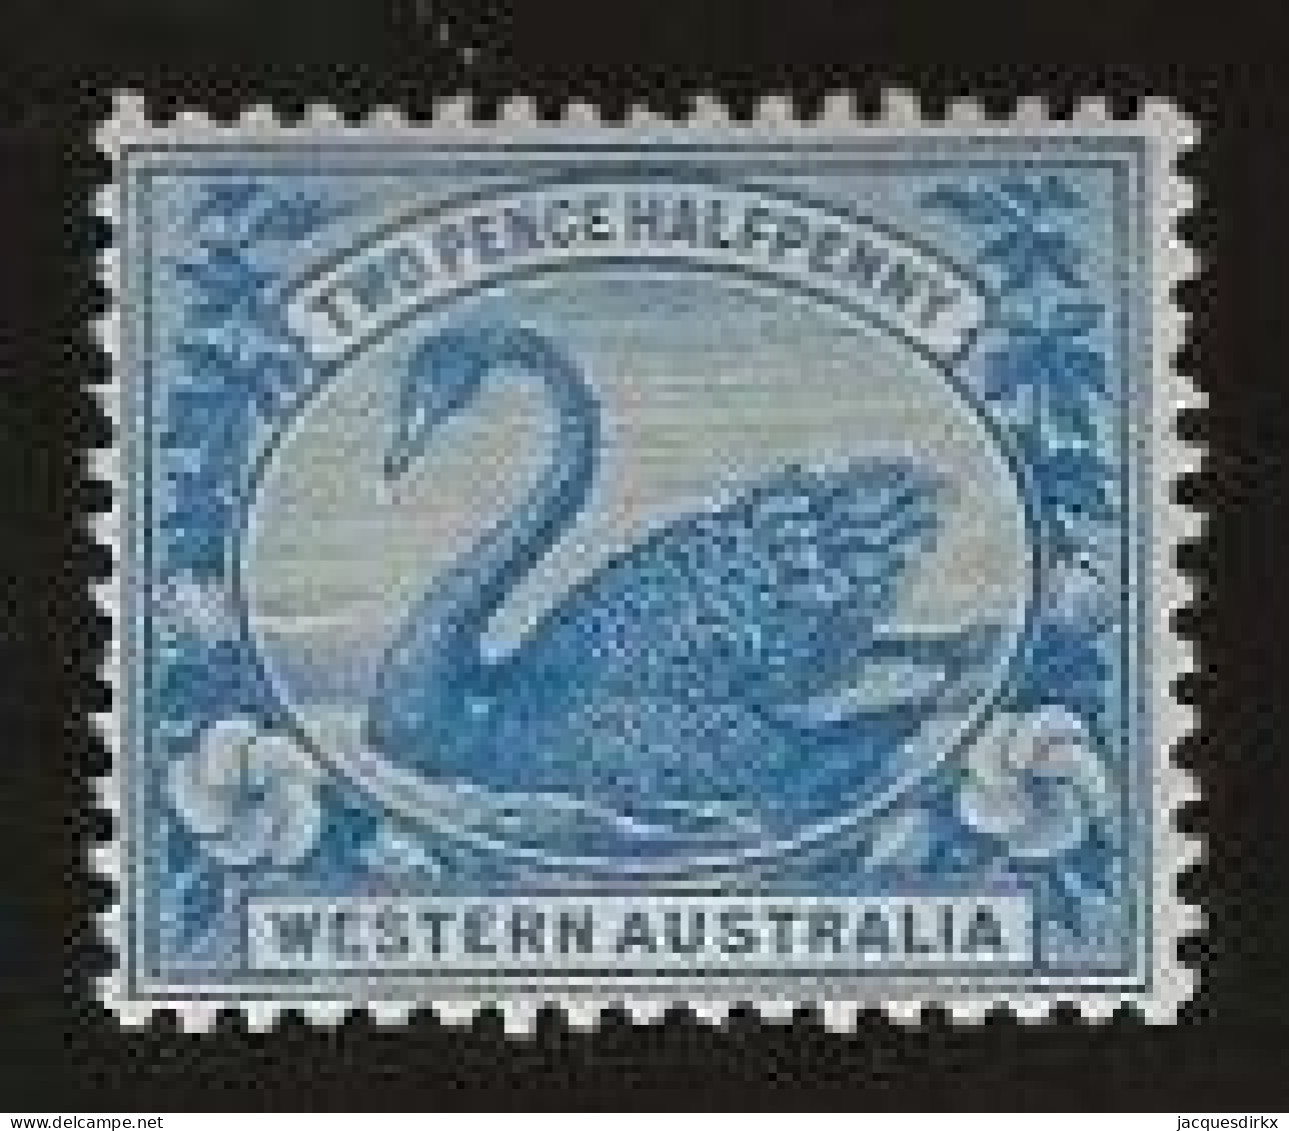 Western Australia     .   SG    .    114         .   *       .     Mint-hinged - Mint Stamps